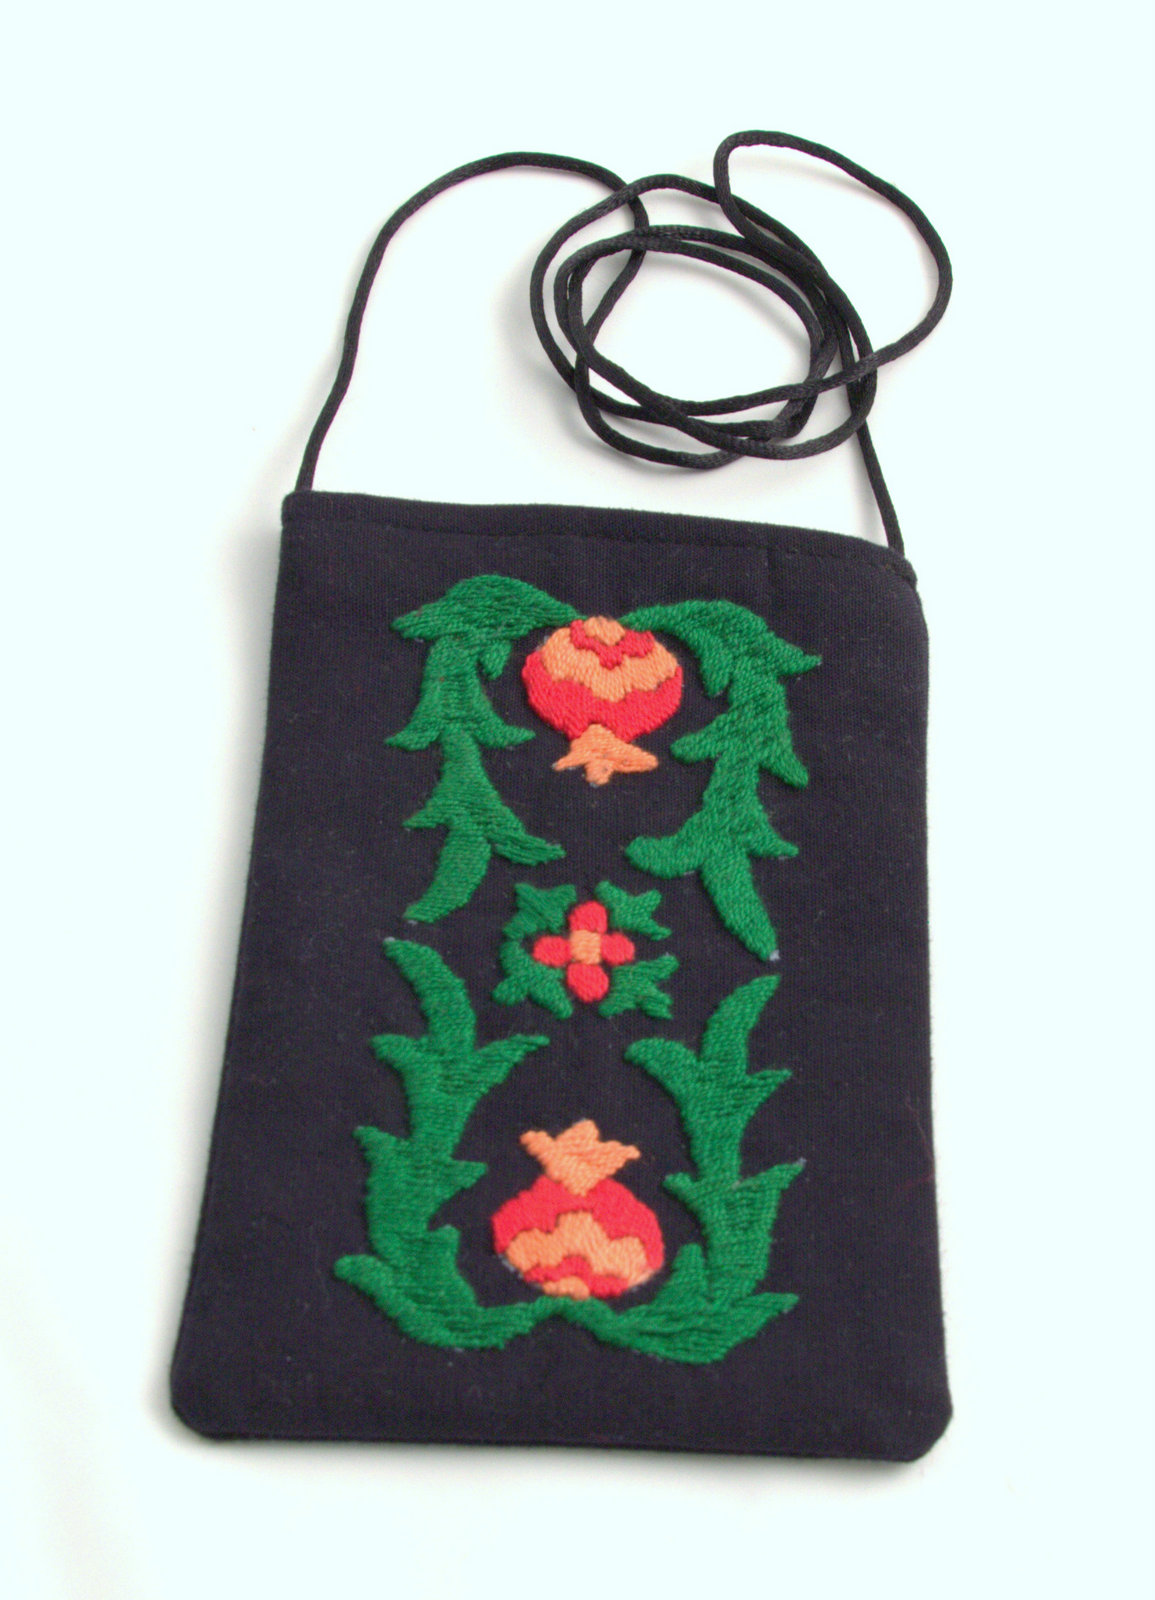 mobile phone pouch - hand-embroidered - Tajikistan - women's cooperative